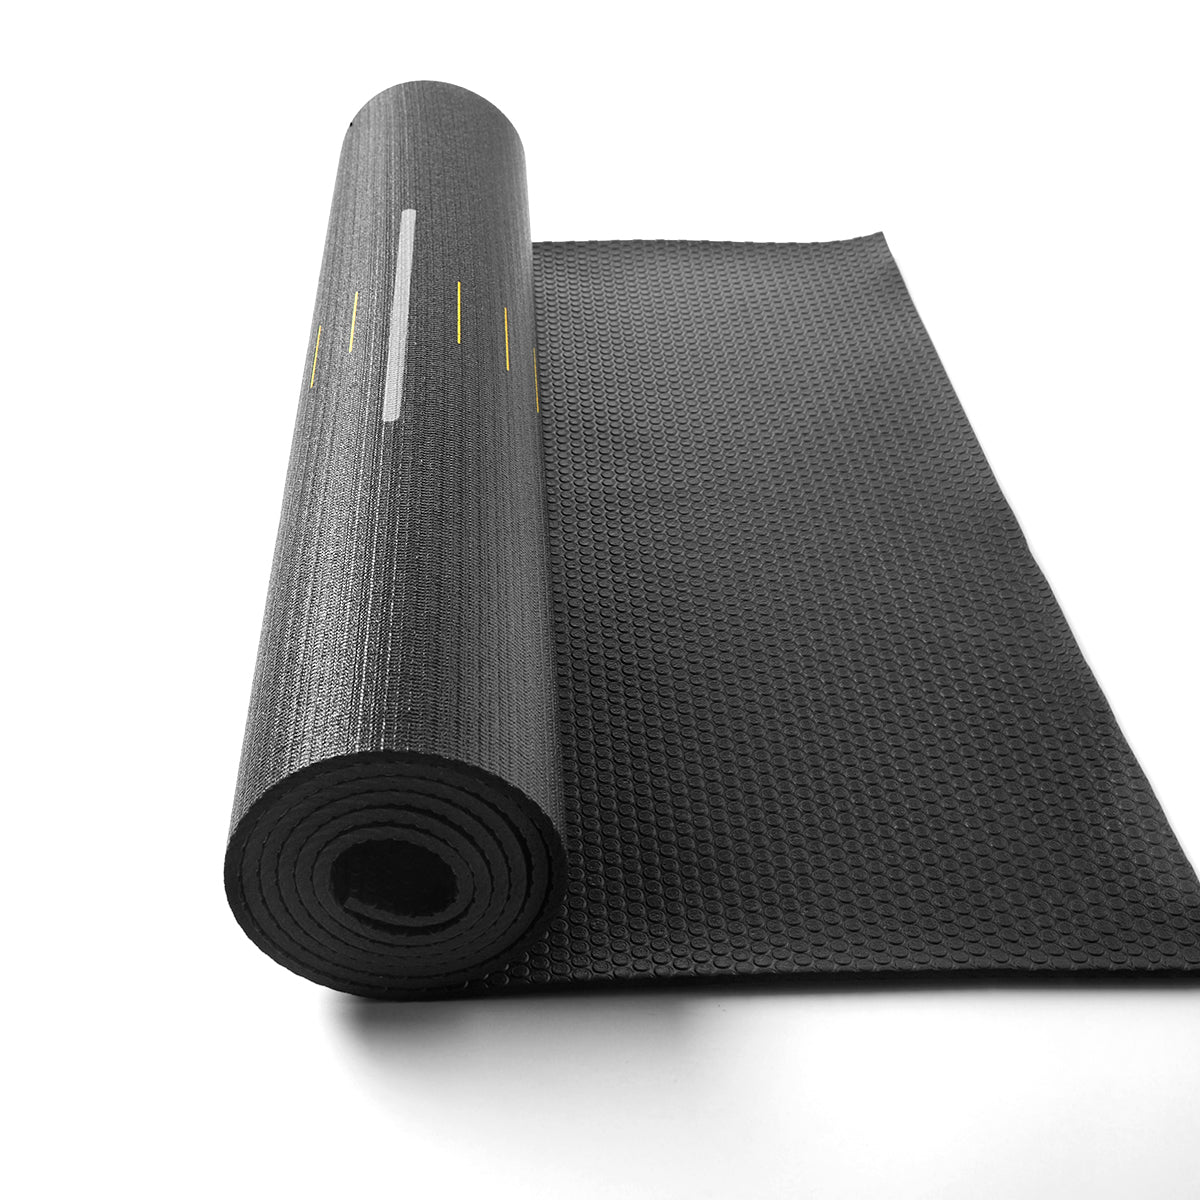 TRX Suspension Training Mat  Perfect for Home and Gym Workouts